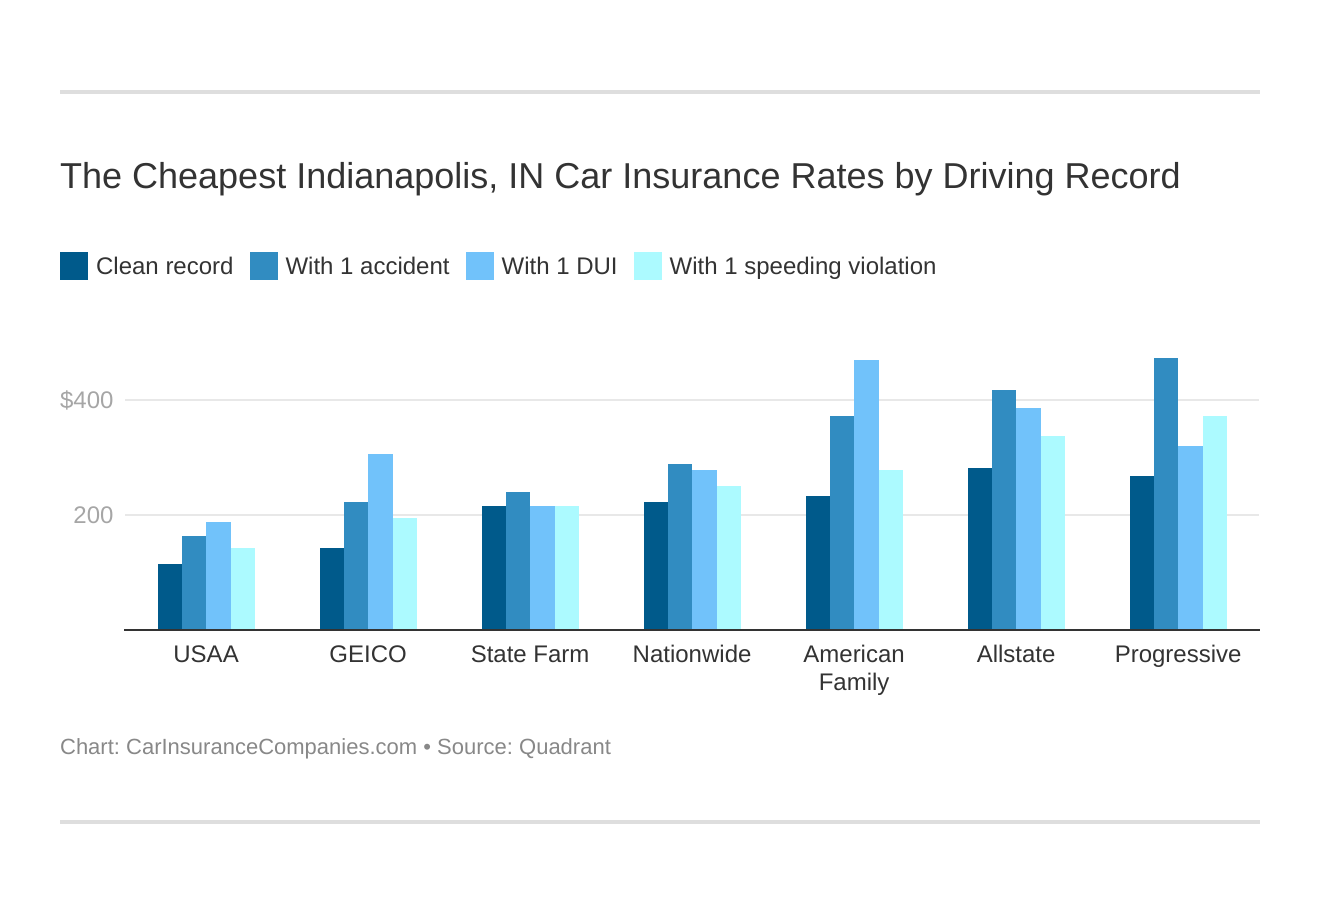 The Cheapest Indianapolis, IN Car Insurance Rates by Driving Record